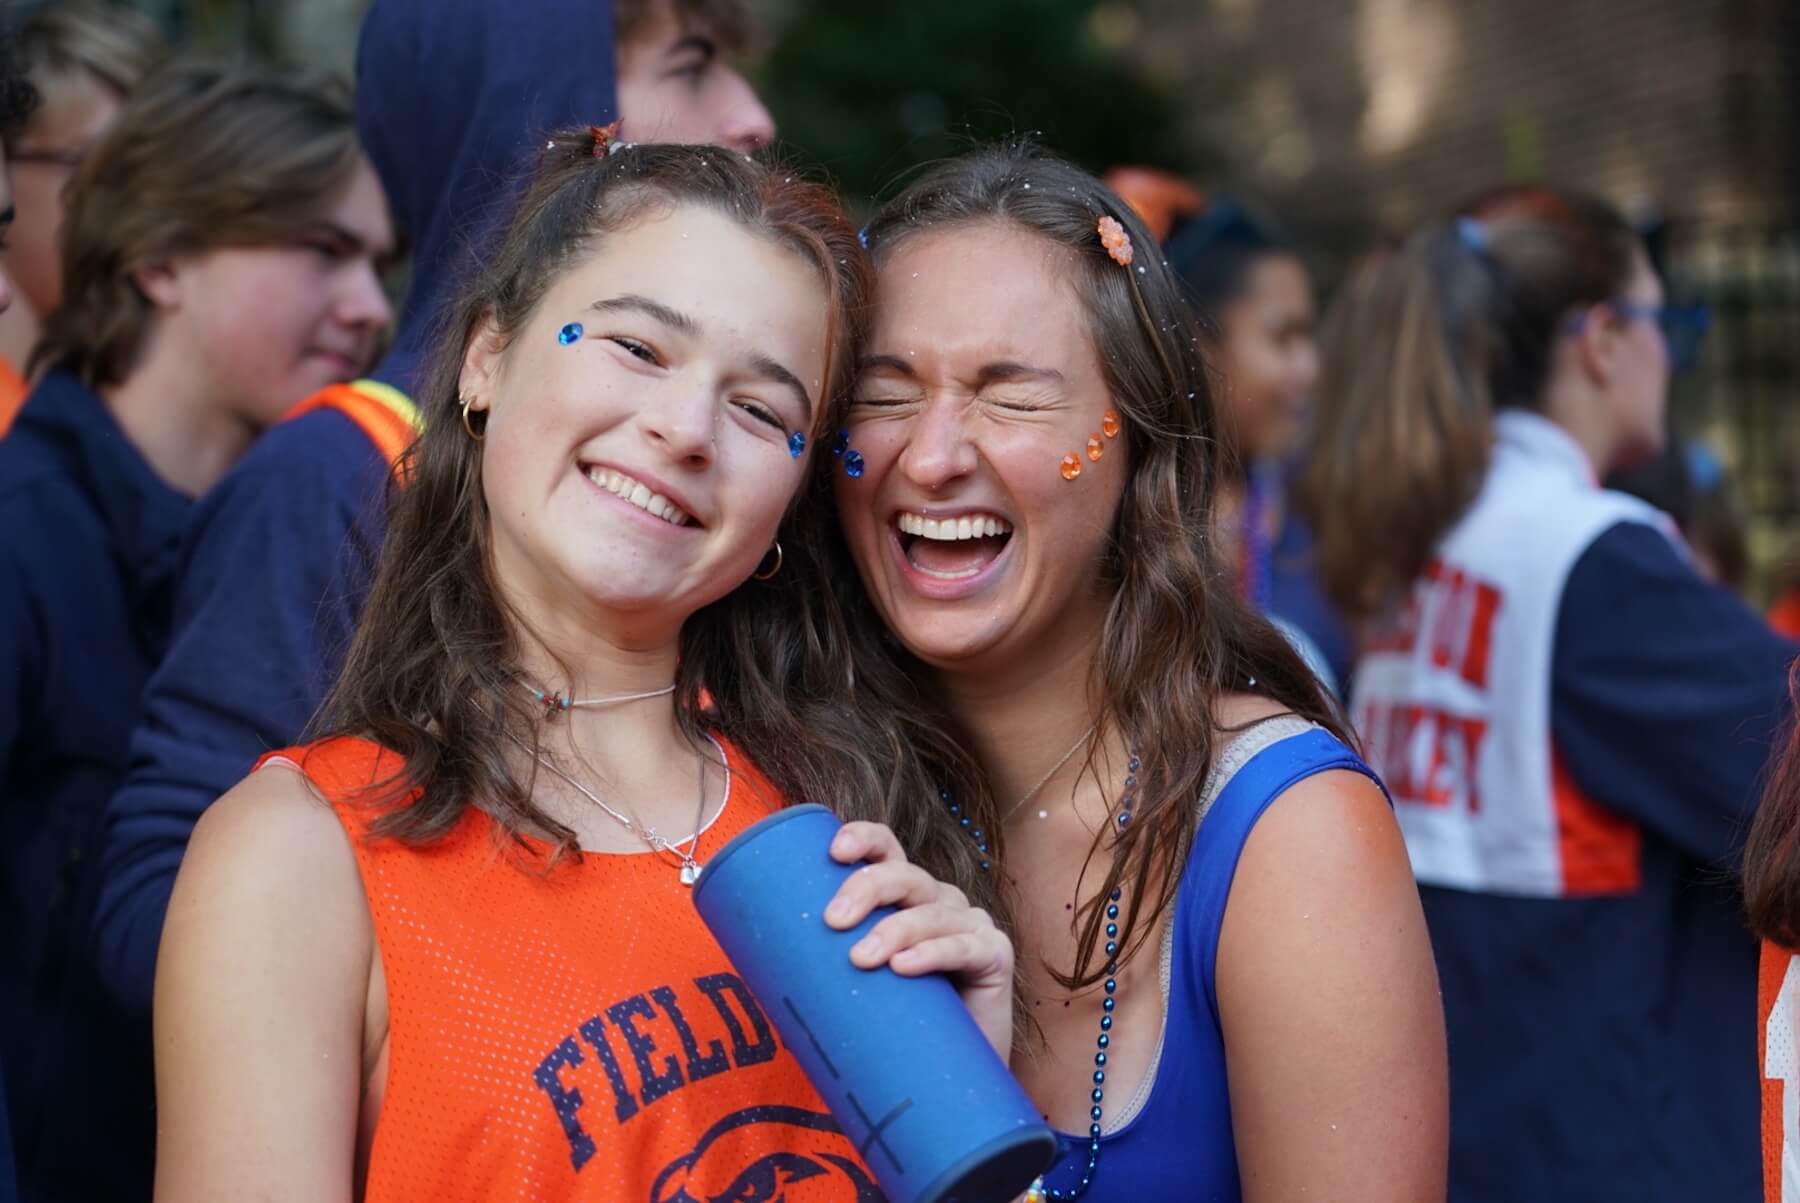 Ethical Culture Fieldston School Fieldston Upper students dressed in Fieldston spirit for pep rally smiling at camera